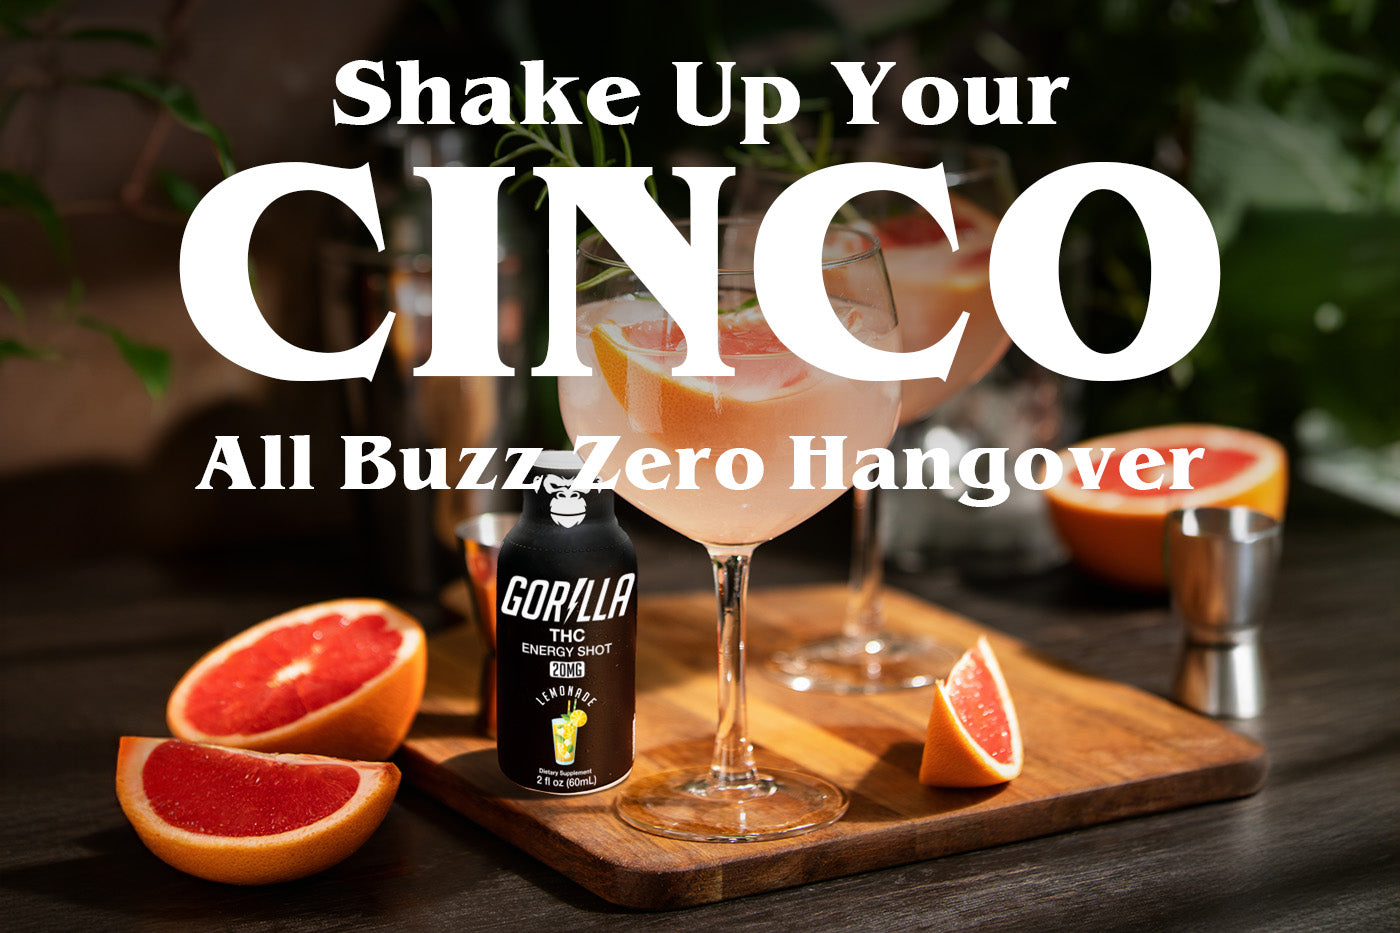 Shake up your cinco this year with a Cana-twist!